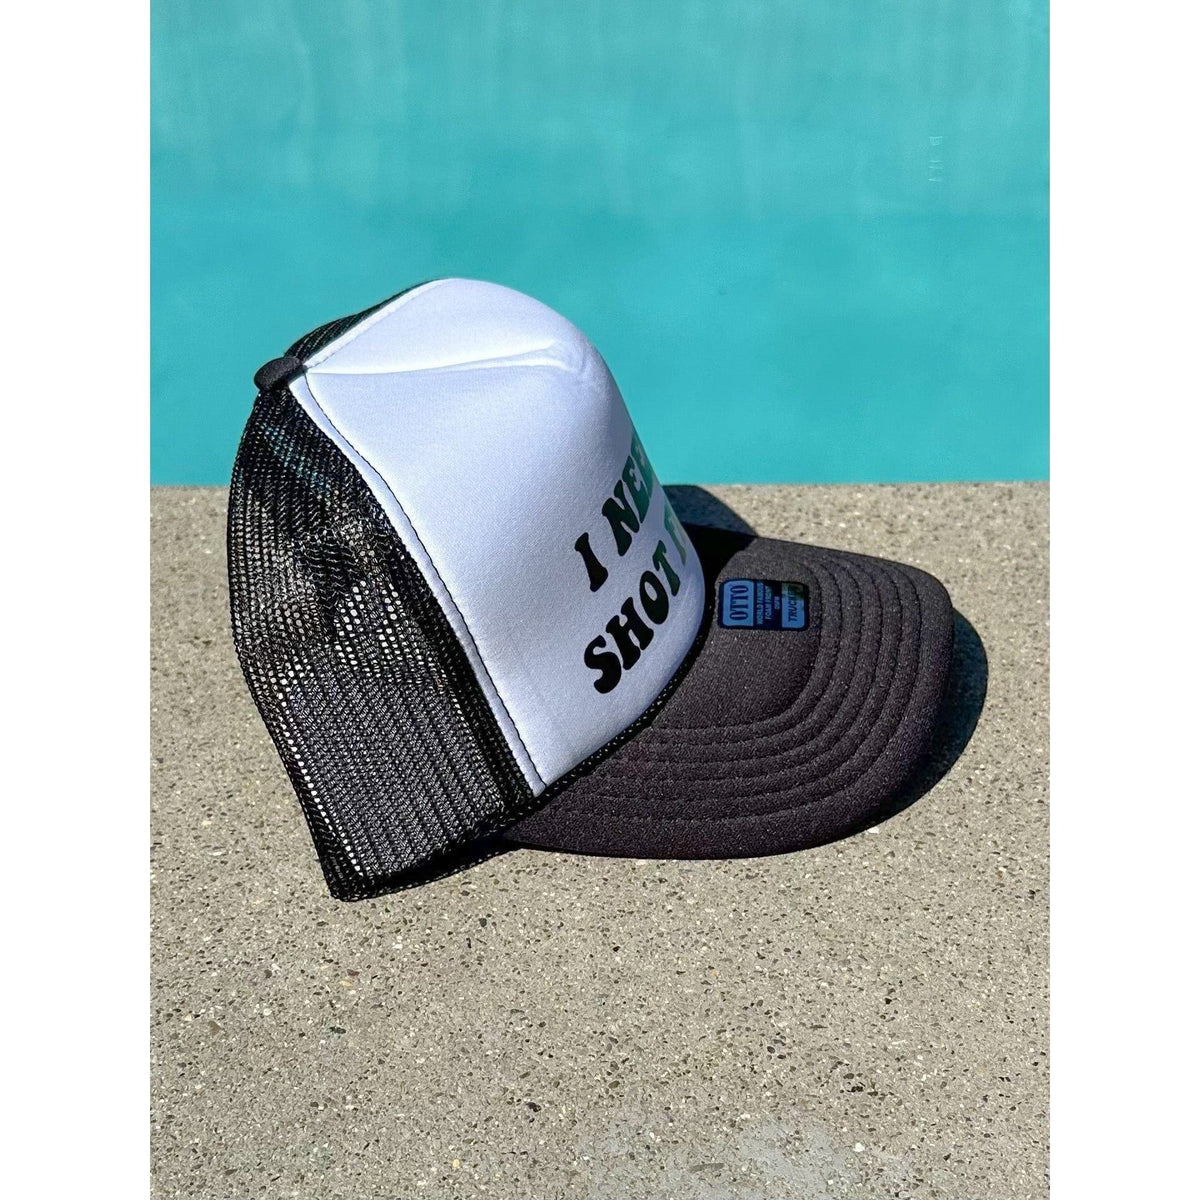 I need a shot first | Black and White Trucker Hat by Haute Sheet | Funny Alcohol related Hats TheFringeCultureCollective